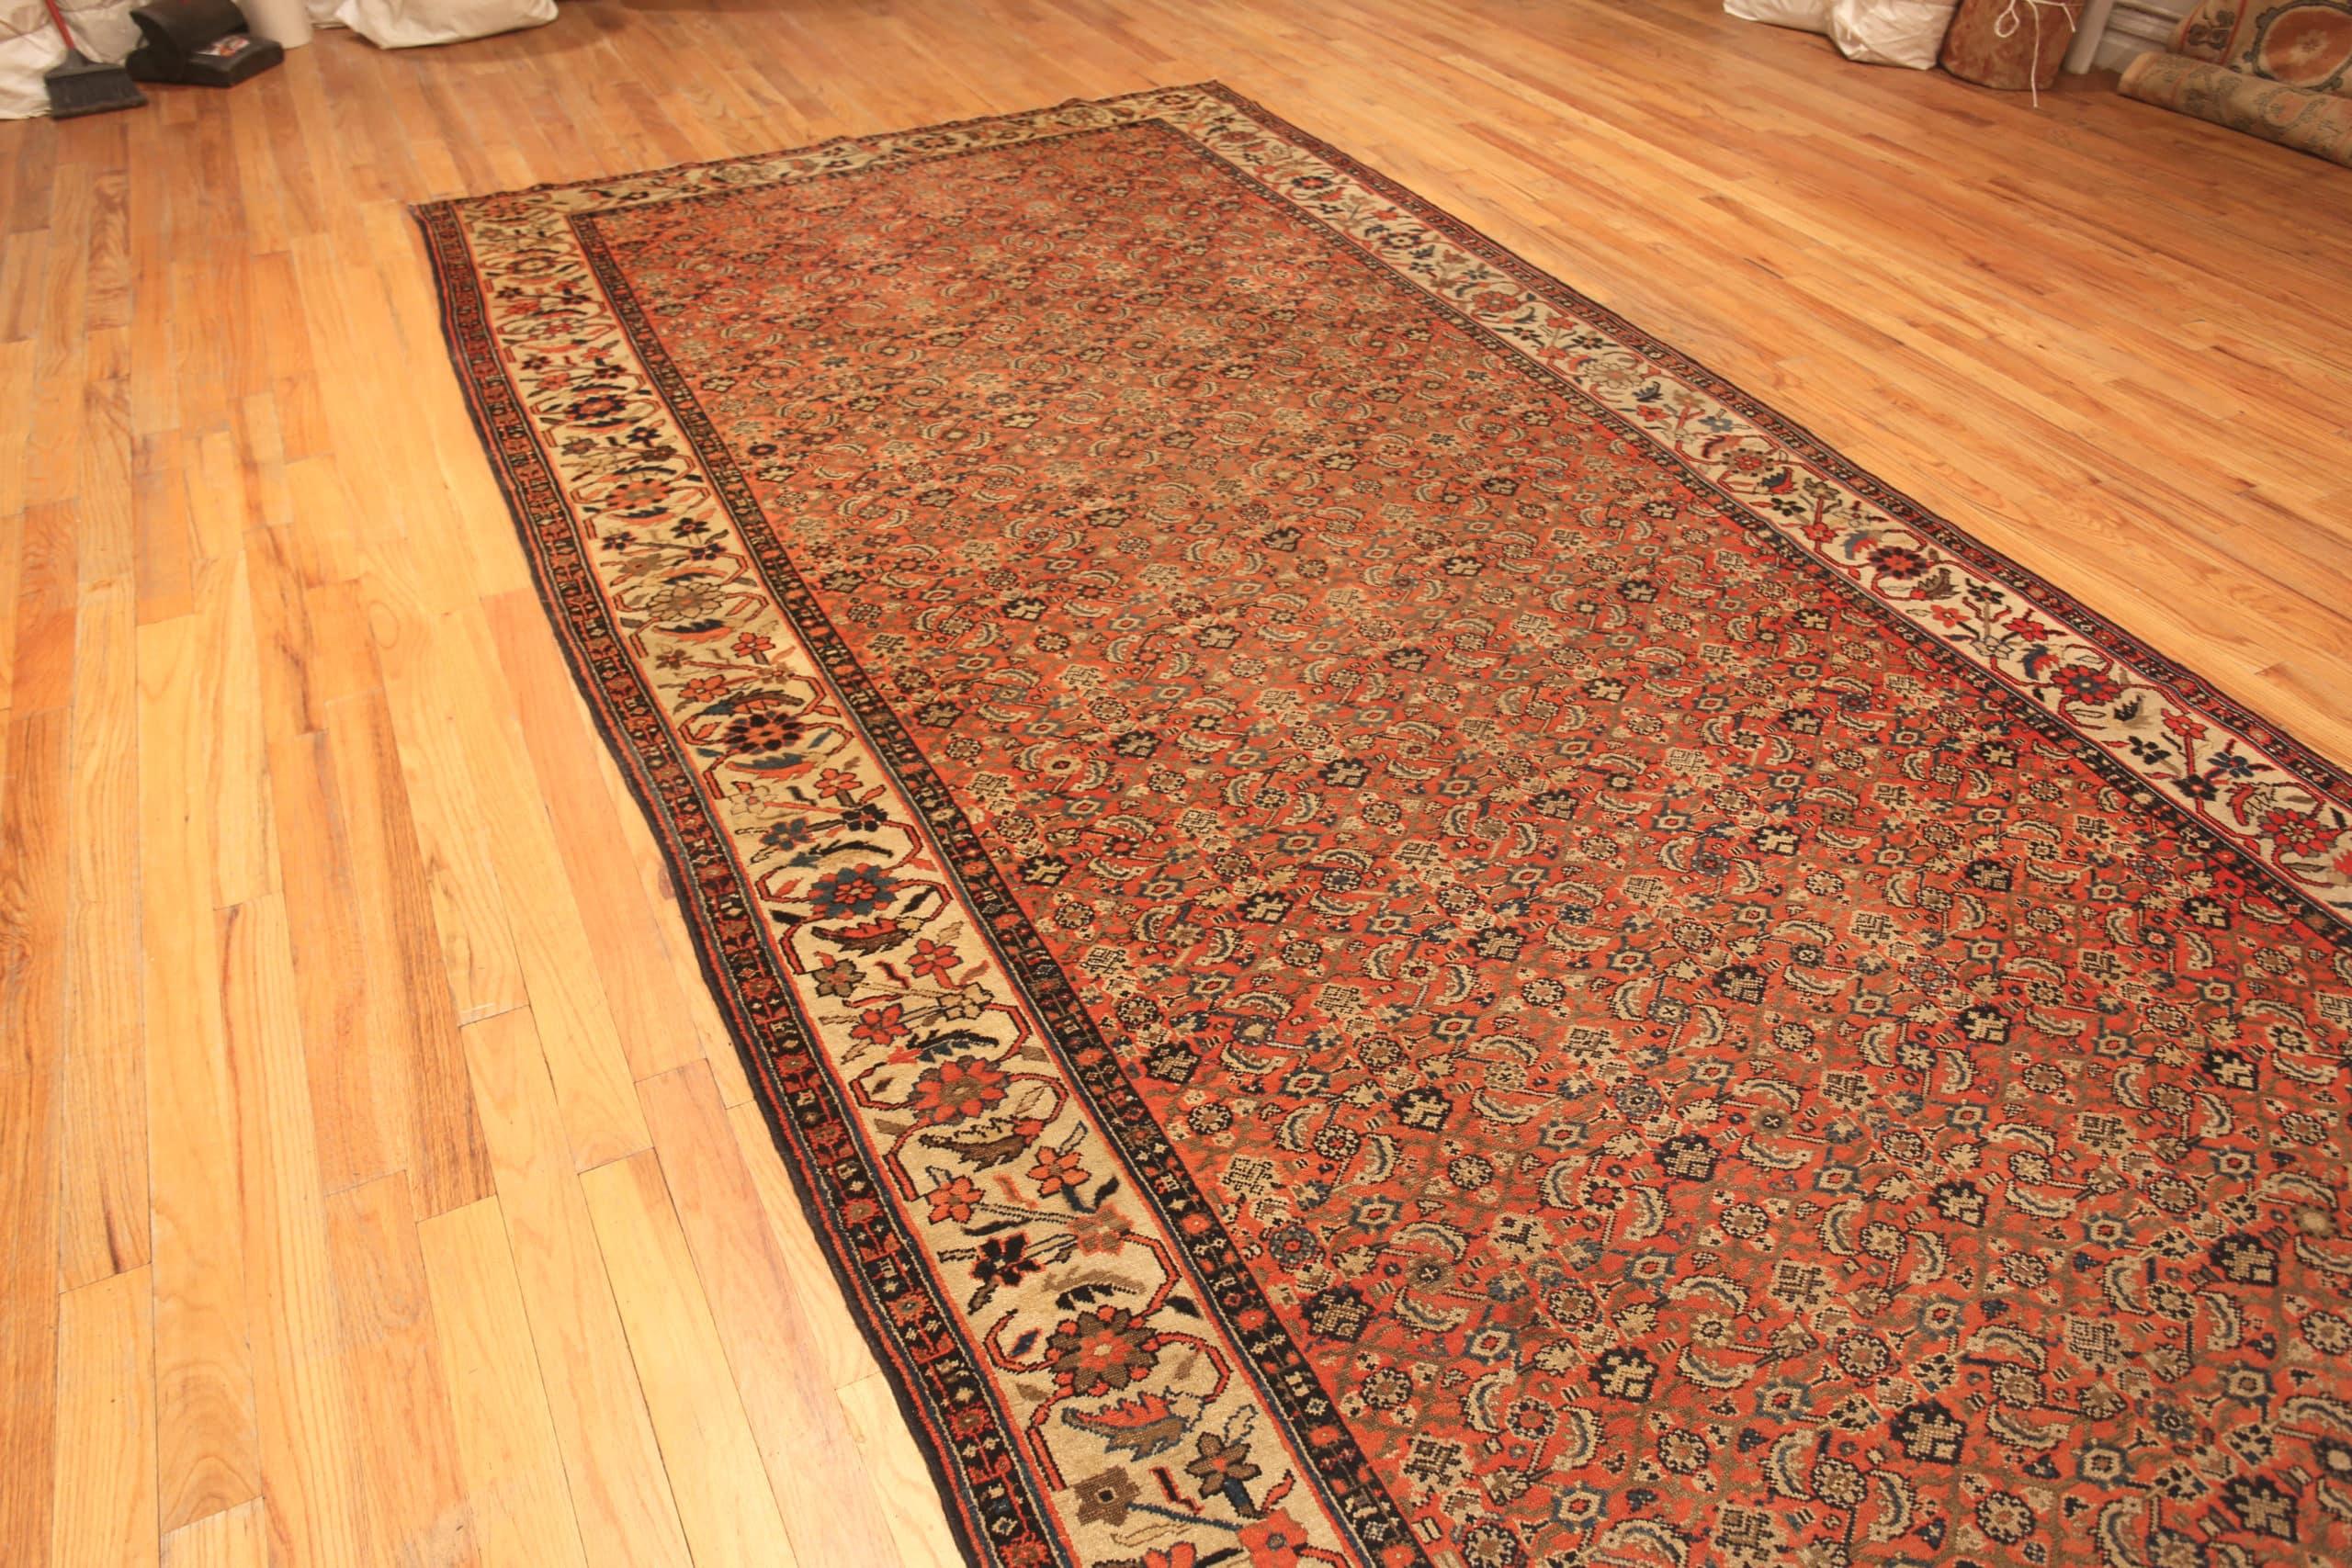 Rustic Gallery Size Antique Casual Elegant Persian Herati Malayer Rug, Country of Origin: Persia, Circa date: 1900. Size: 7 ft 2 in x 16 ft 9 in (2.18 m x 5.11 m)

